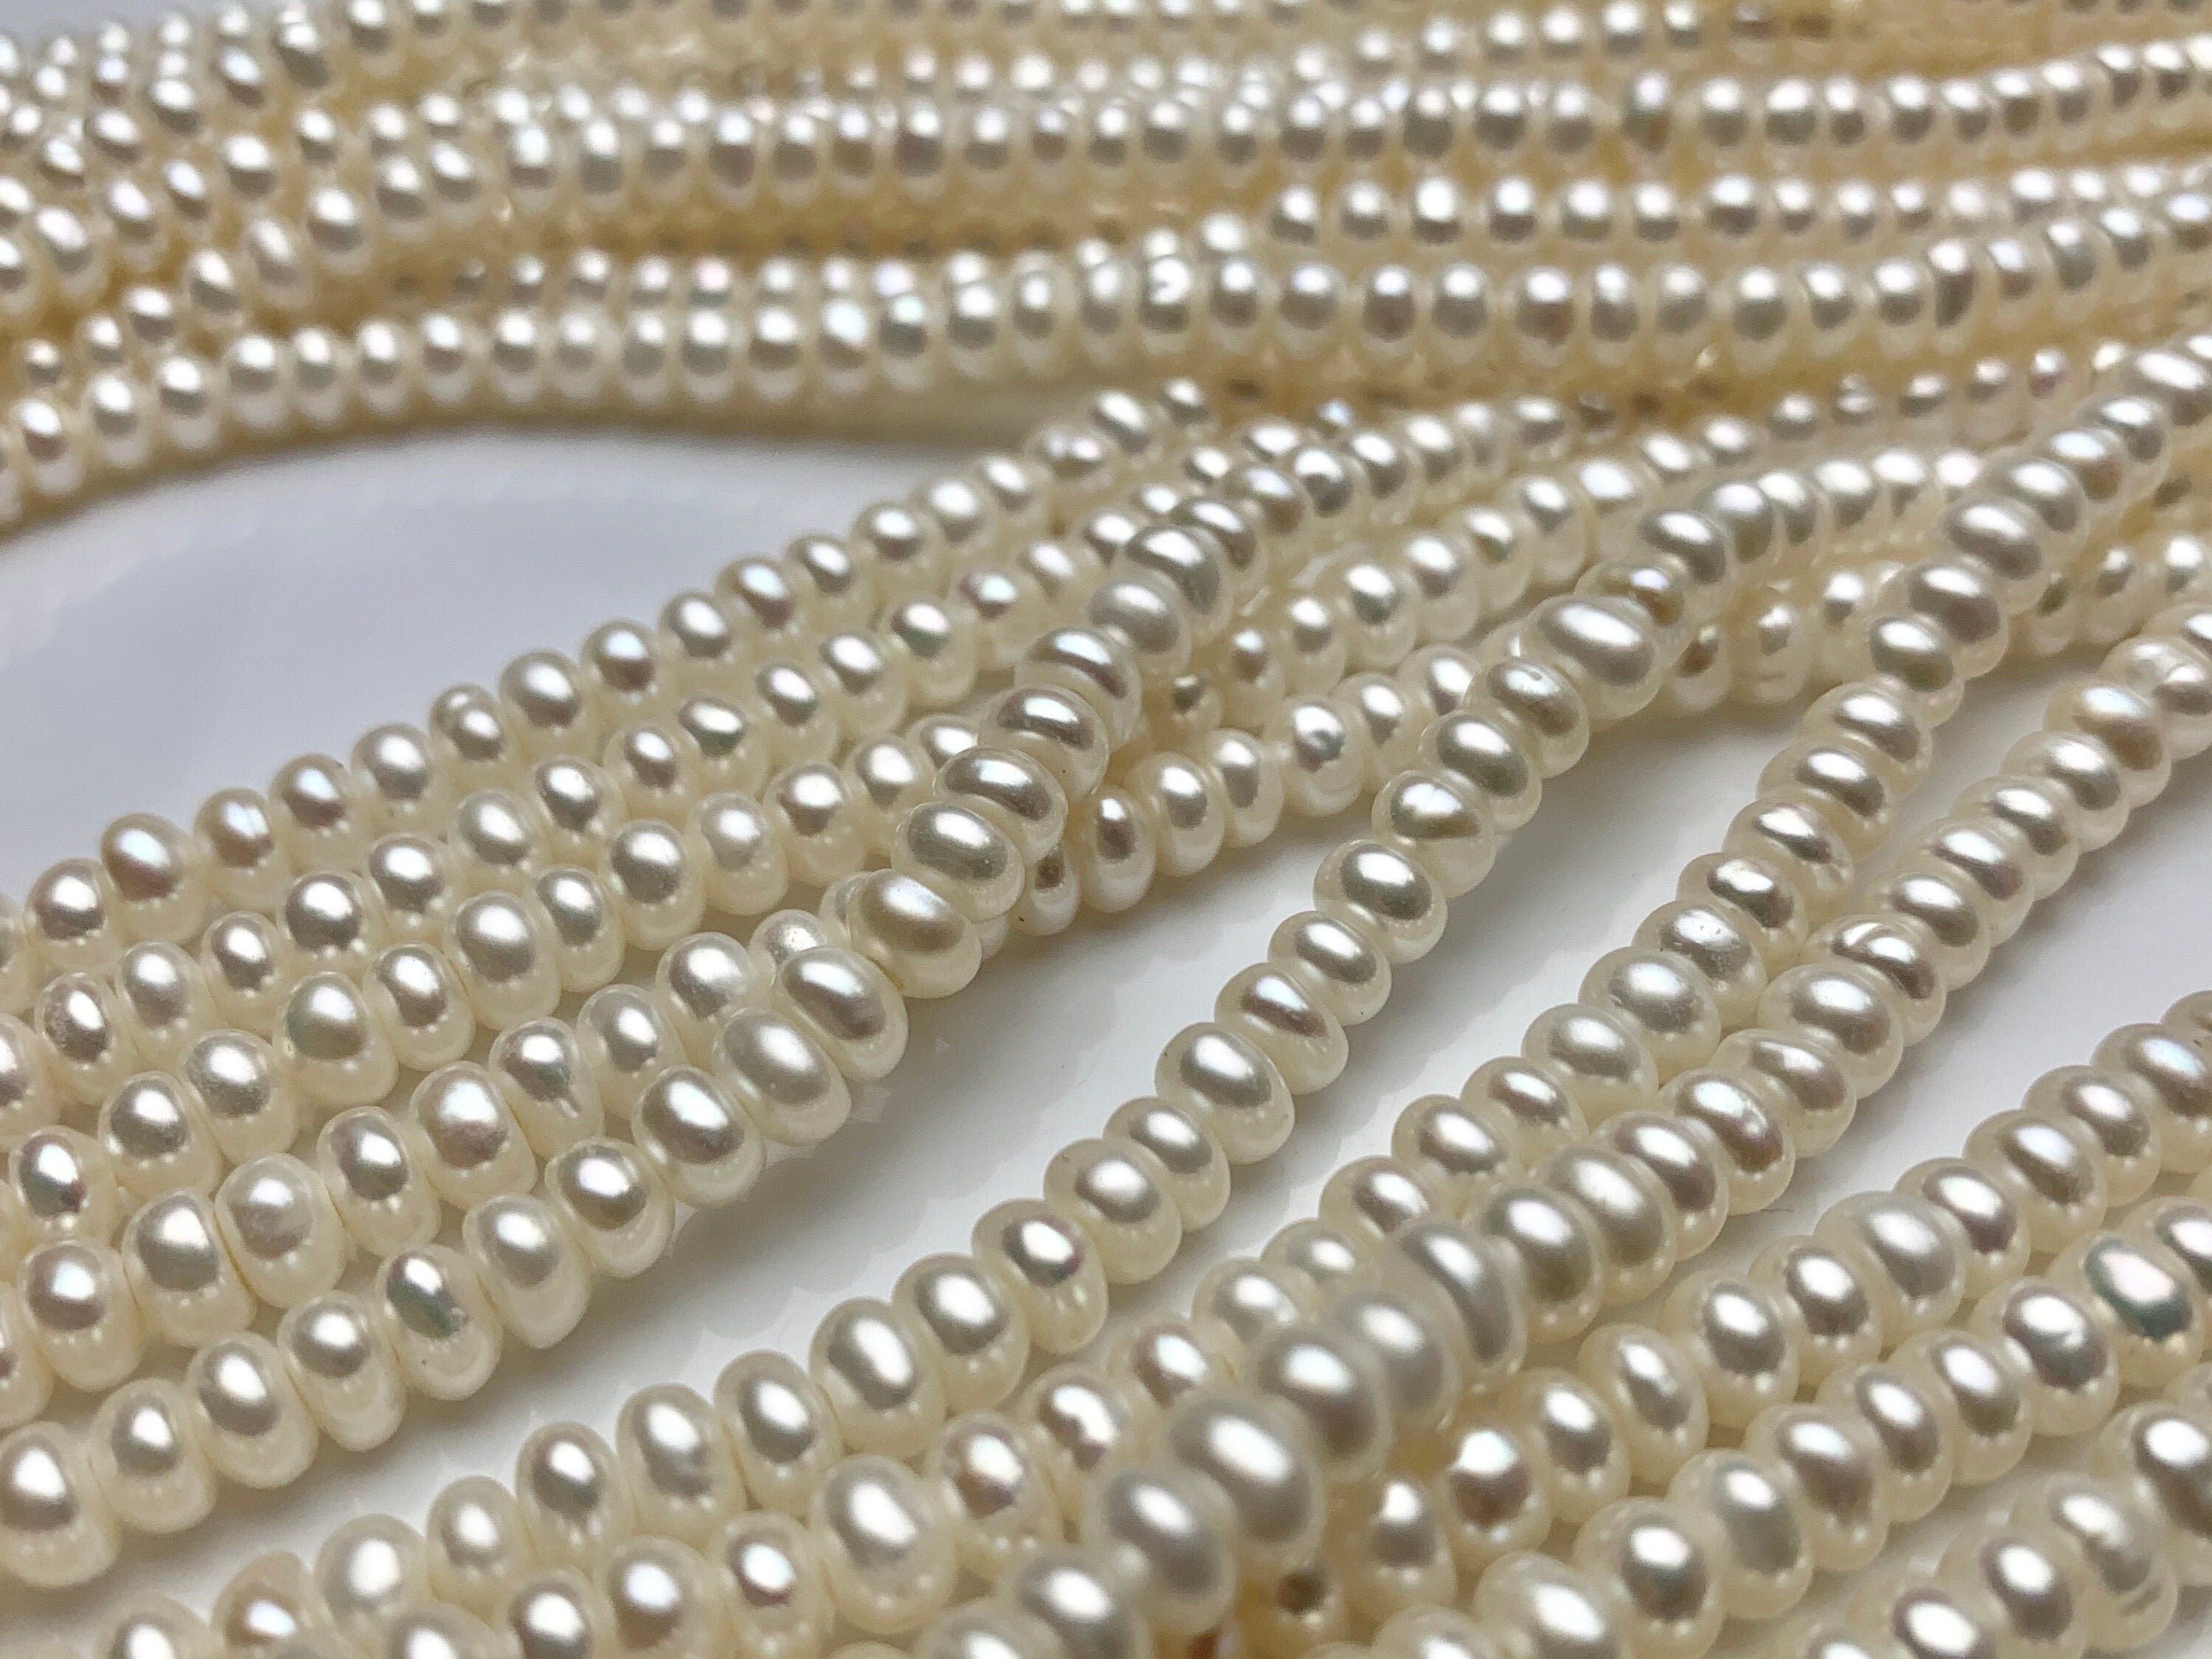 5 mm AAA Large Hole Champagne Color Round Button Freshwater Pearls Hole  Size 1.5 mm Genuine Large Hole Rondelle Freshwater Pearl Beads #1845